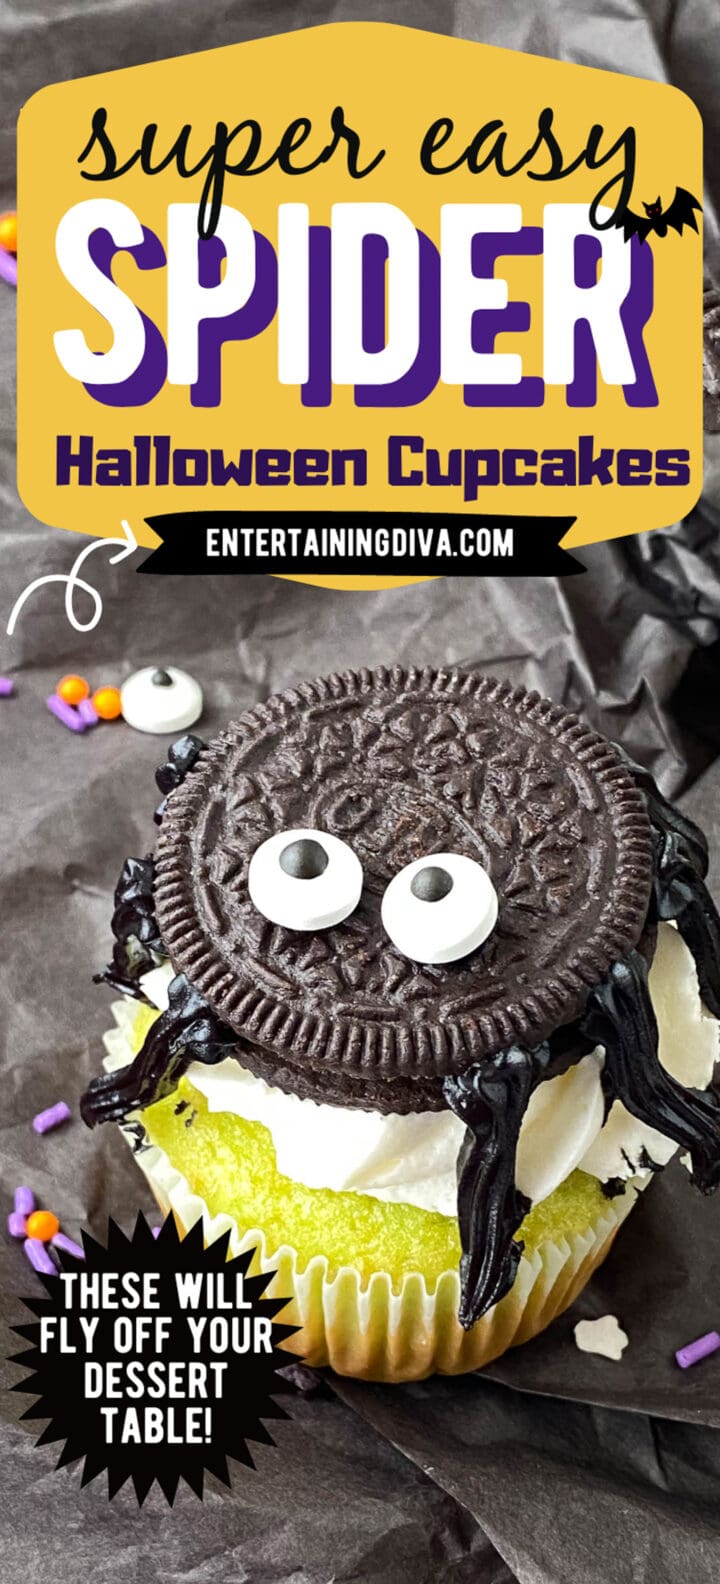 Super Easy Halloween Spider Cupcakes With Oreo Cookies